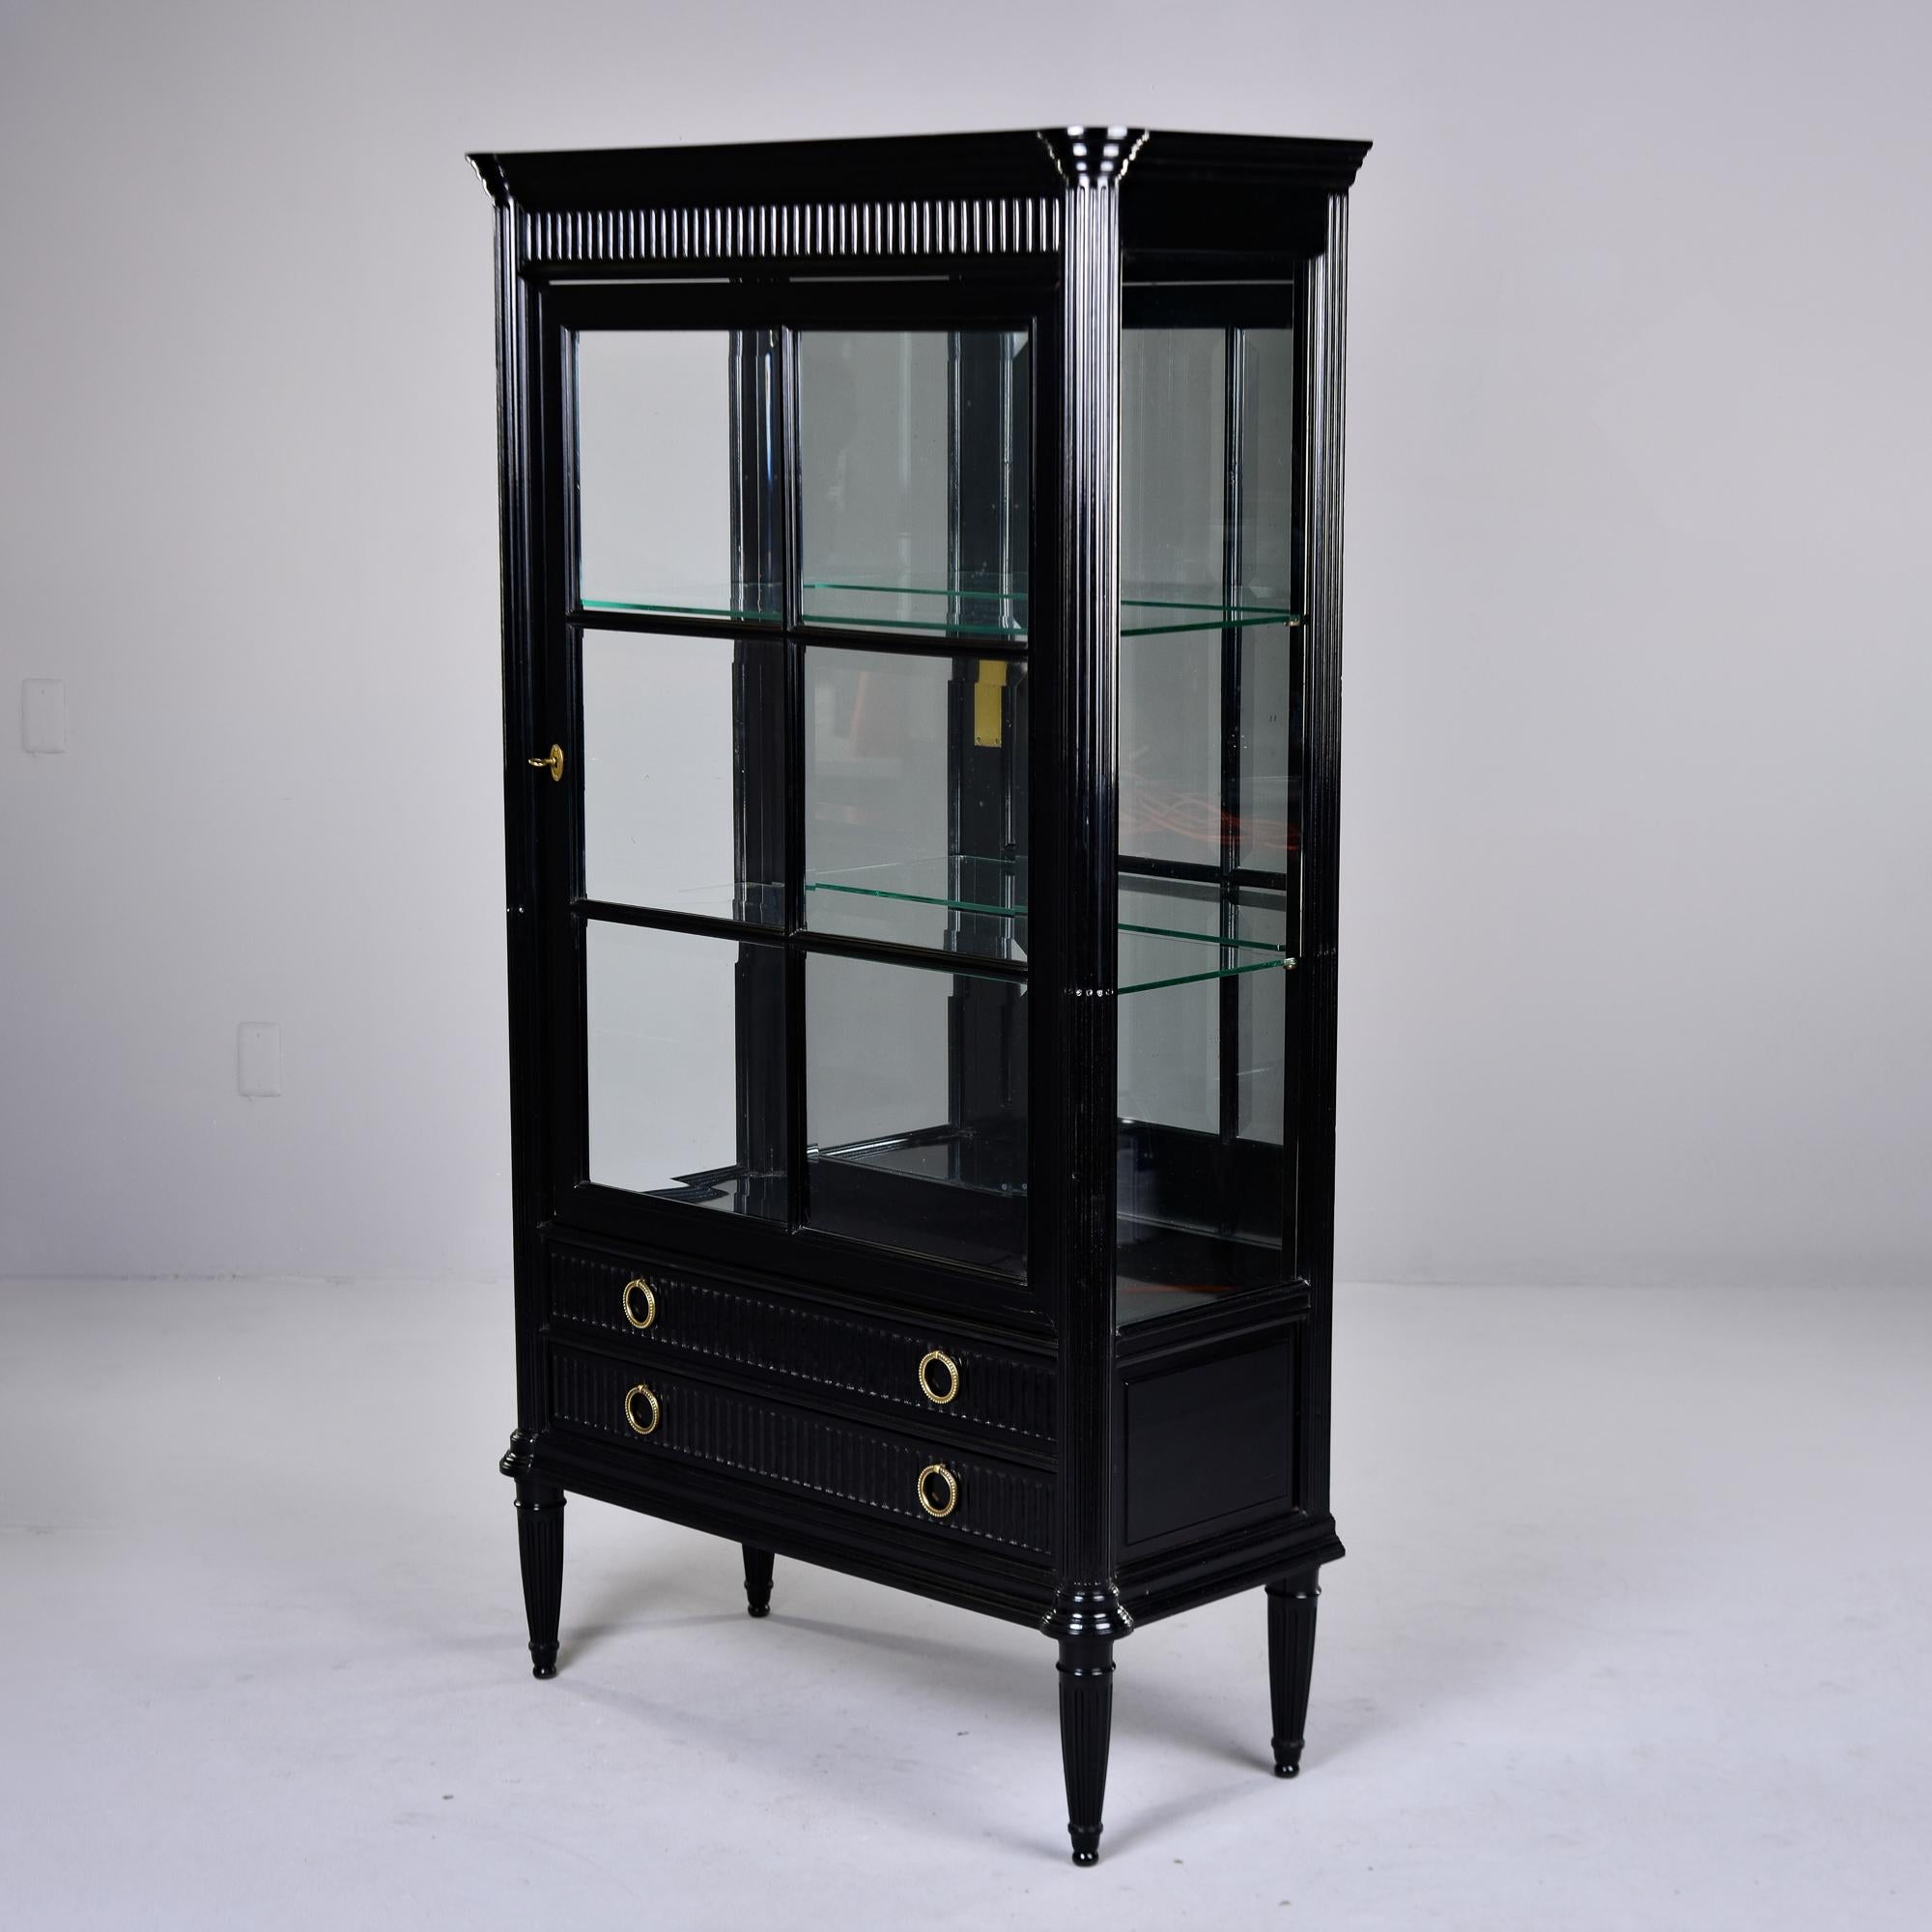 Found in France, this Louis Philippe style glass-front cabinet dates from the 1920s. New, professionally applied ebonised finish. Cabinet has pediment and reeded pilasters. Functional lock on door, two internal glass shelves and mirrored back.